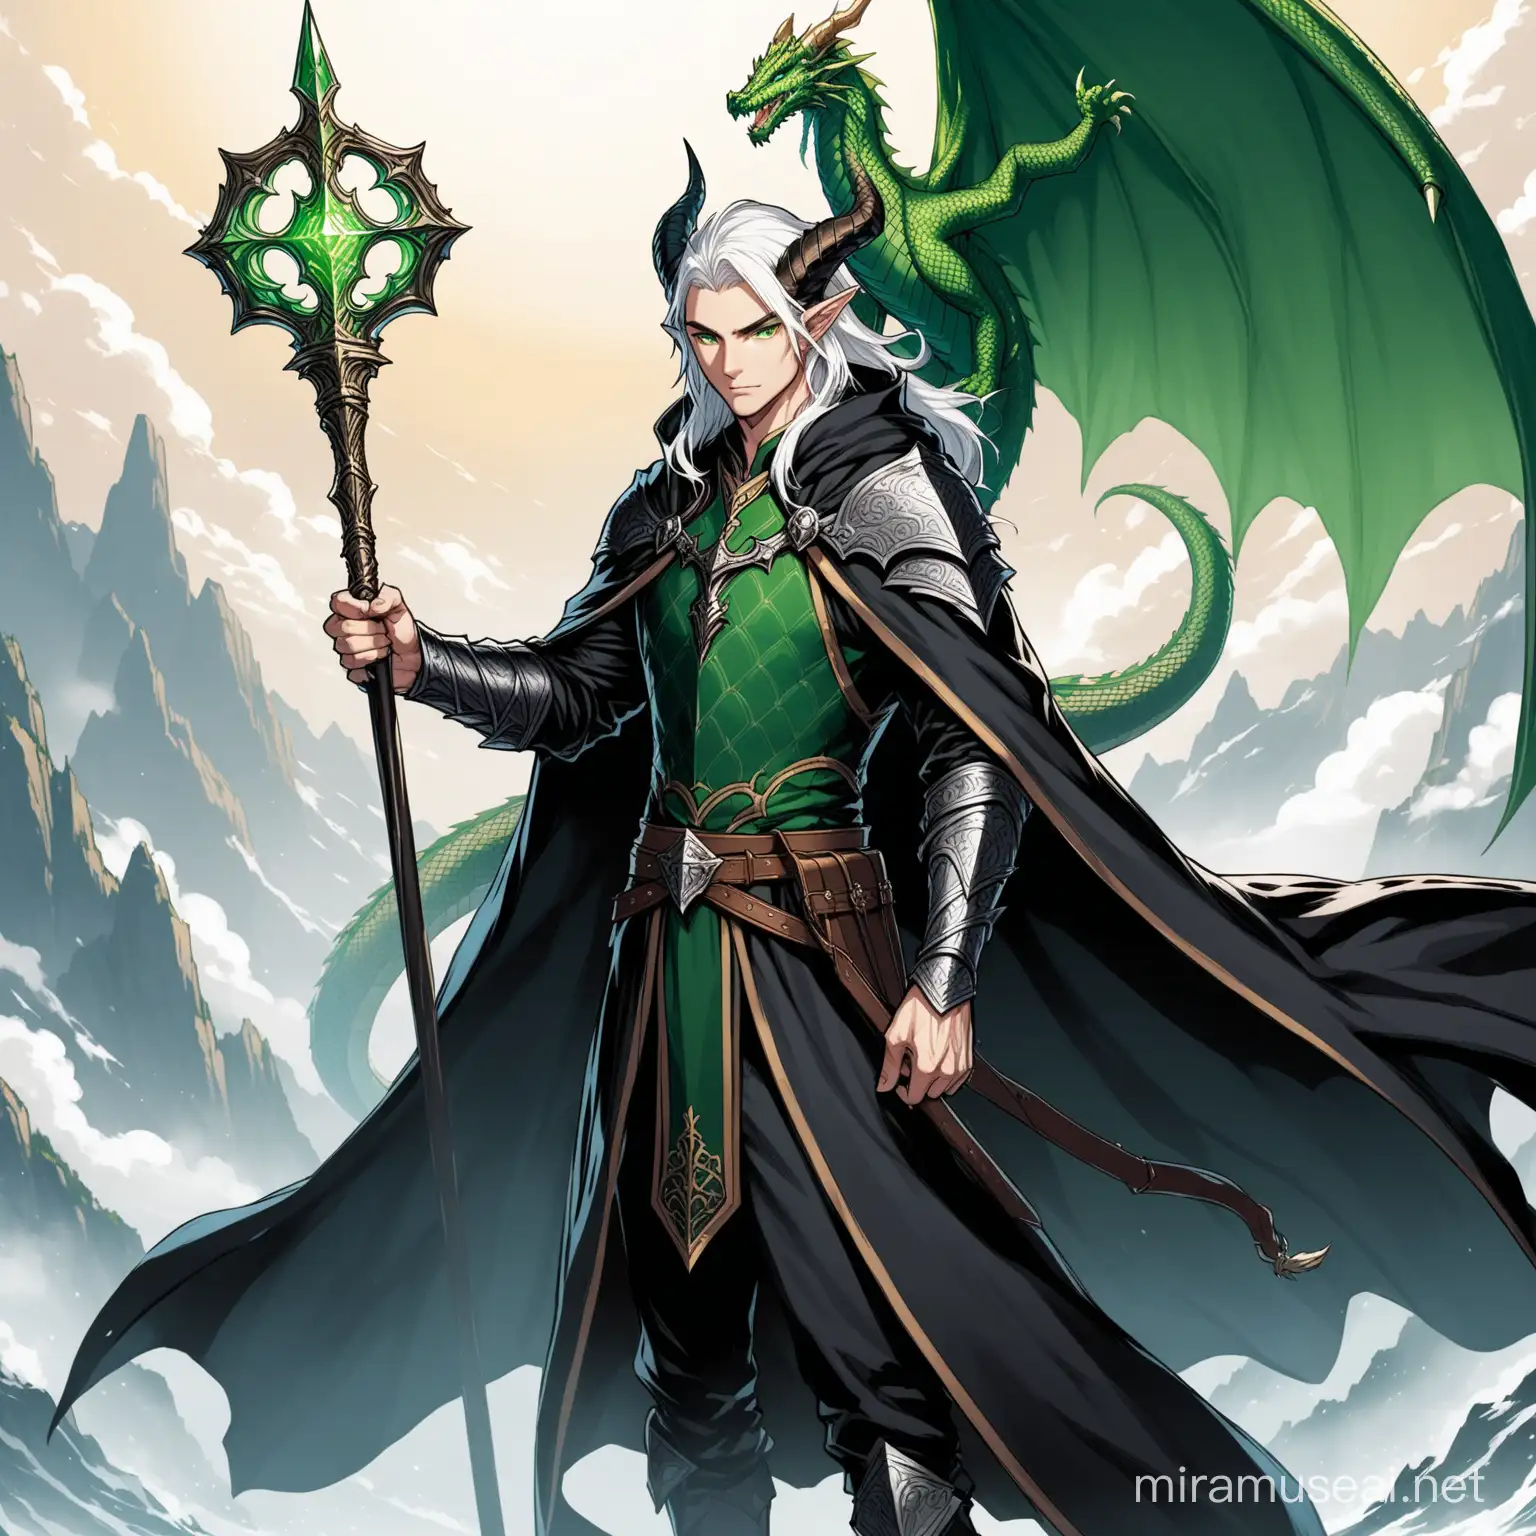 dnd slim male with green eyes and white hair with dragon horns wearing black fancy cloak  holding a staff and a sword at his hilt